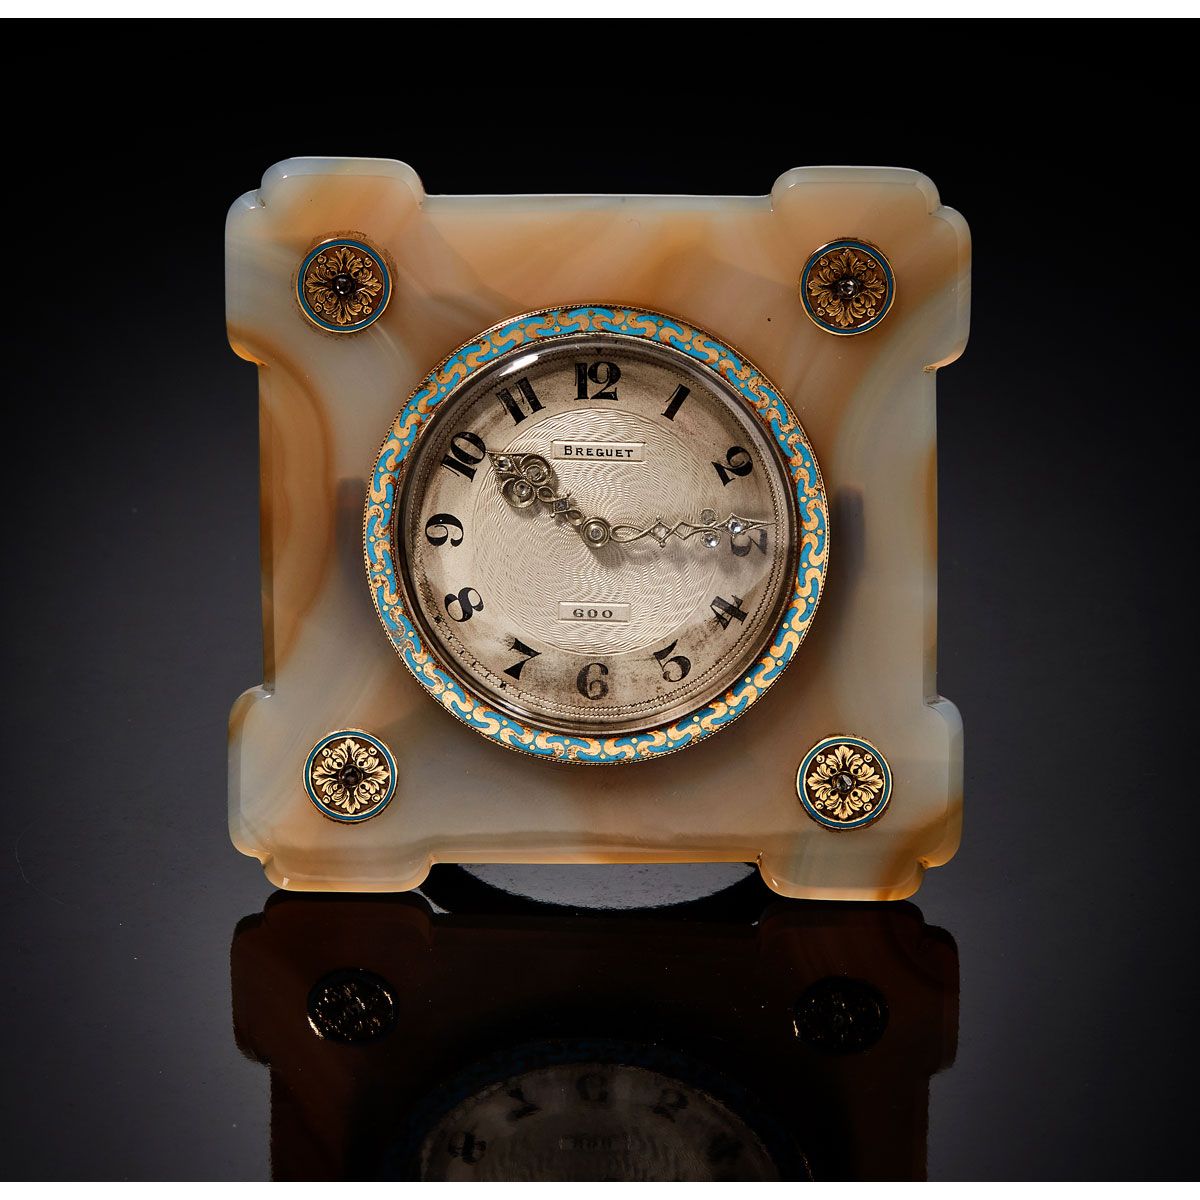 Null Breguet, n° 600, sold in 1925.

A superb and unique square-shaped blond aga&hellip;